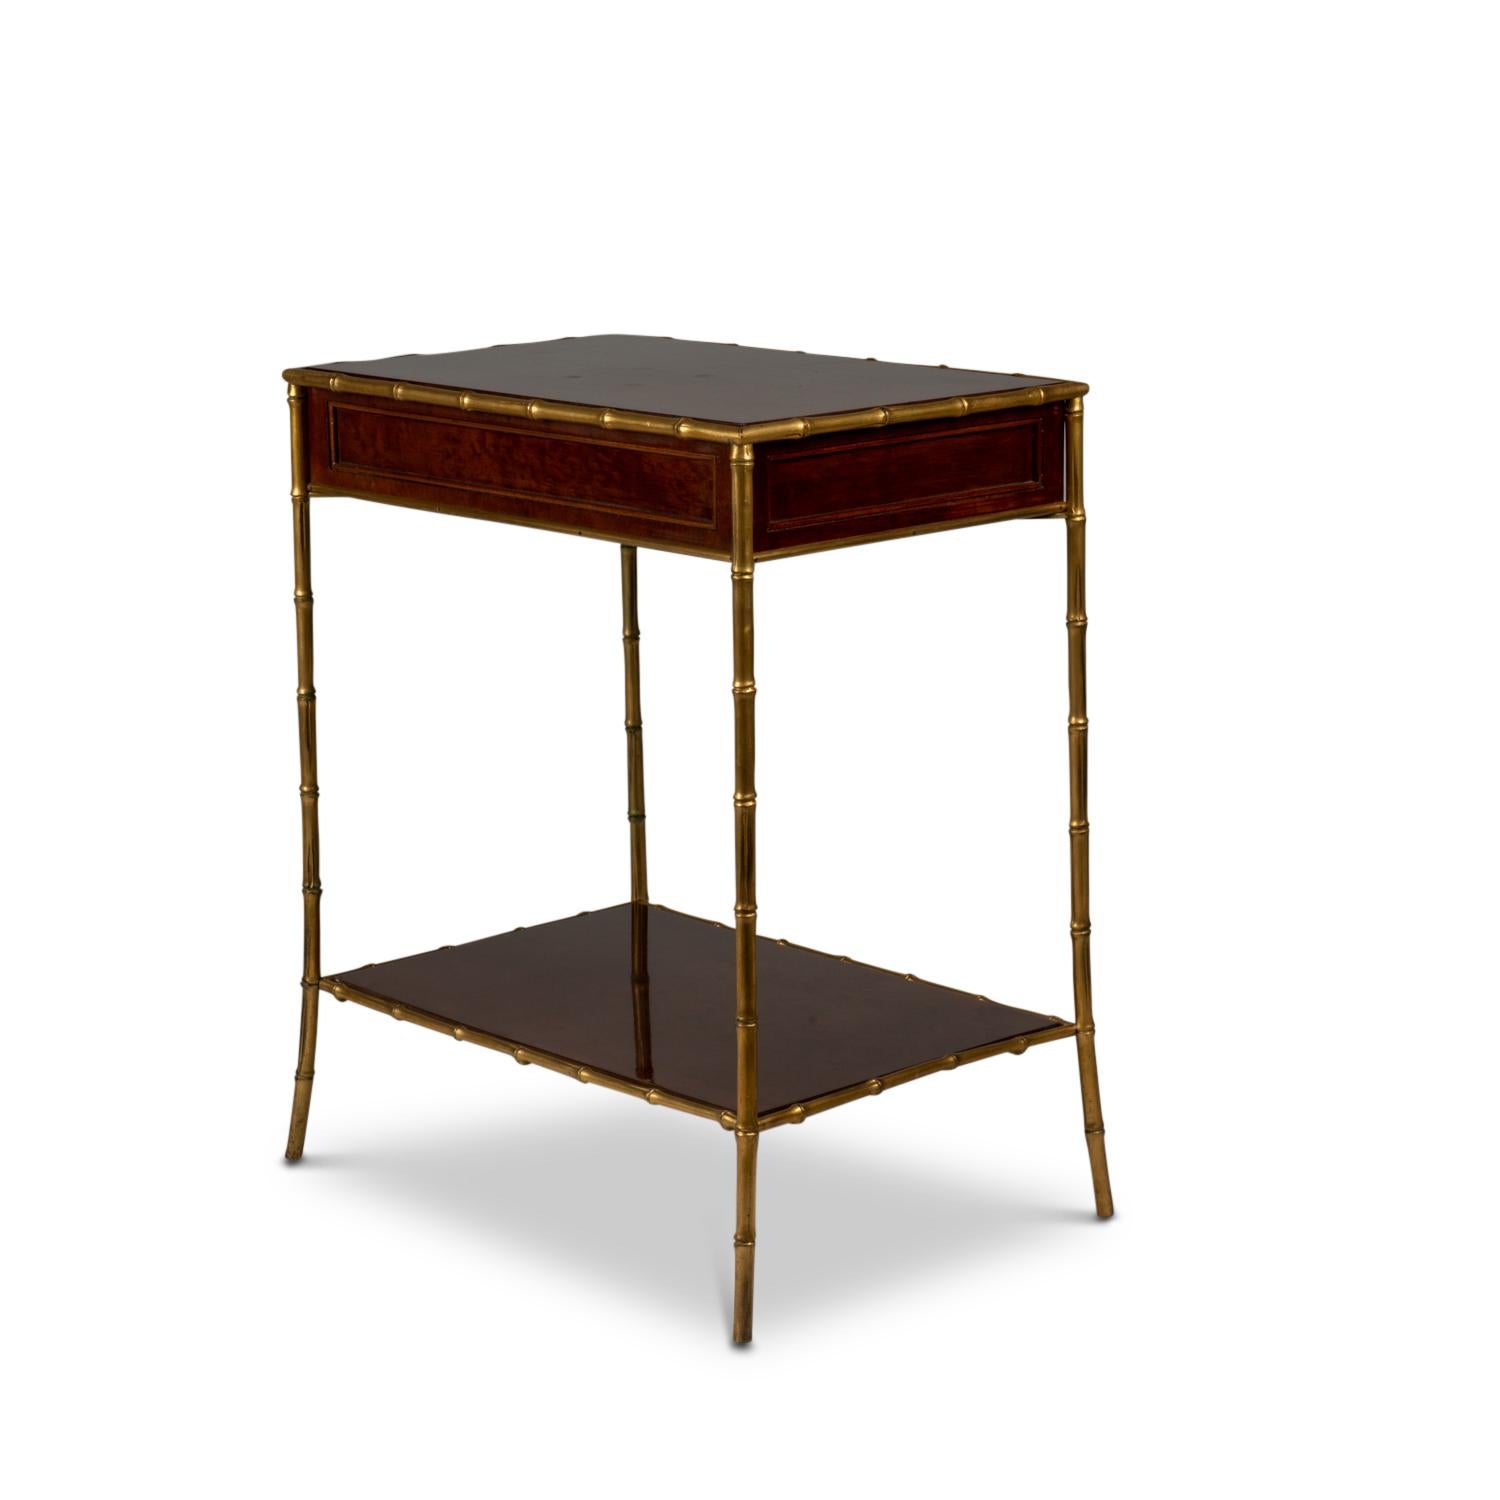 Maison Jansen, by.

Side table in speckled mahogany and bronze consisting of two trays and a drawer in front, rectangular in shape. Base in gilded bronze
mimicking bamboo.

French work realized in the 1970s.